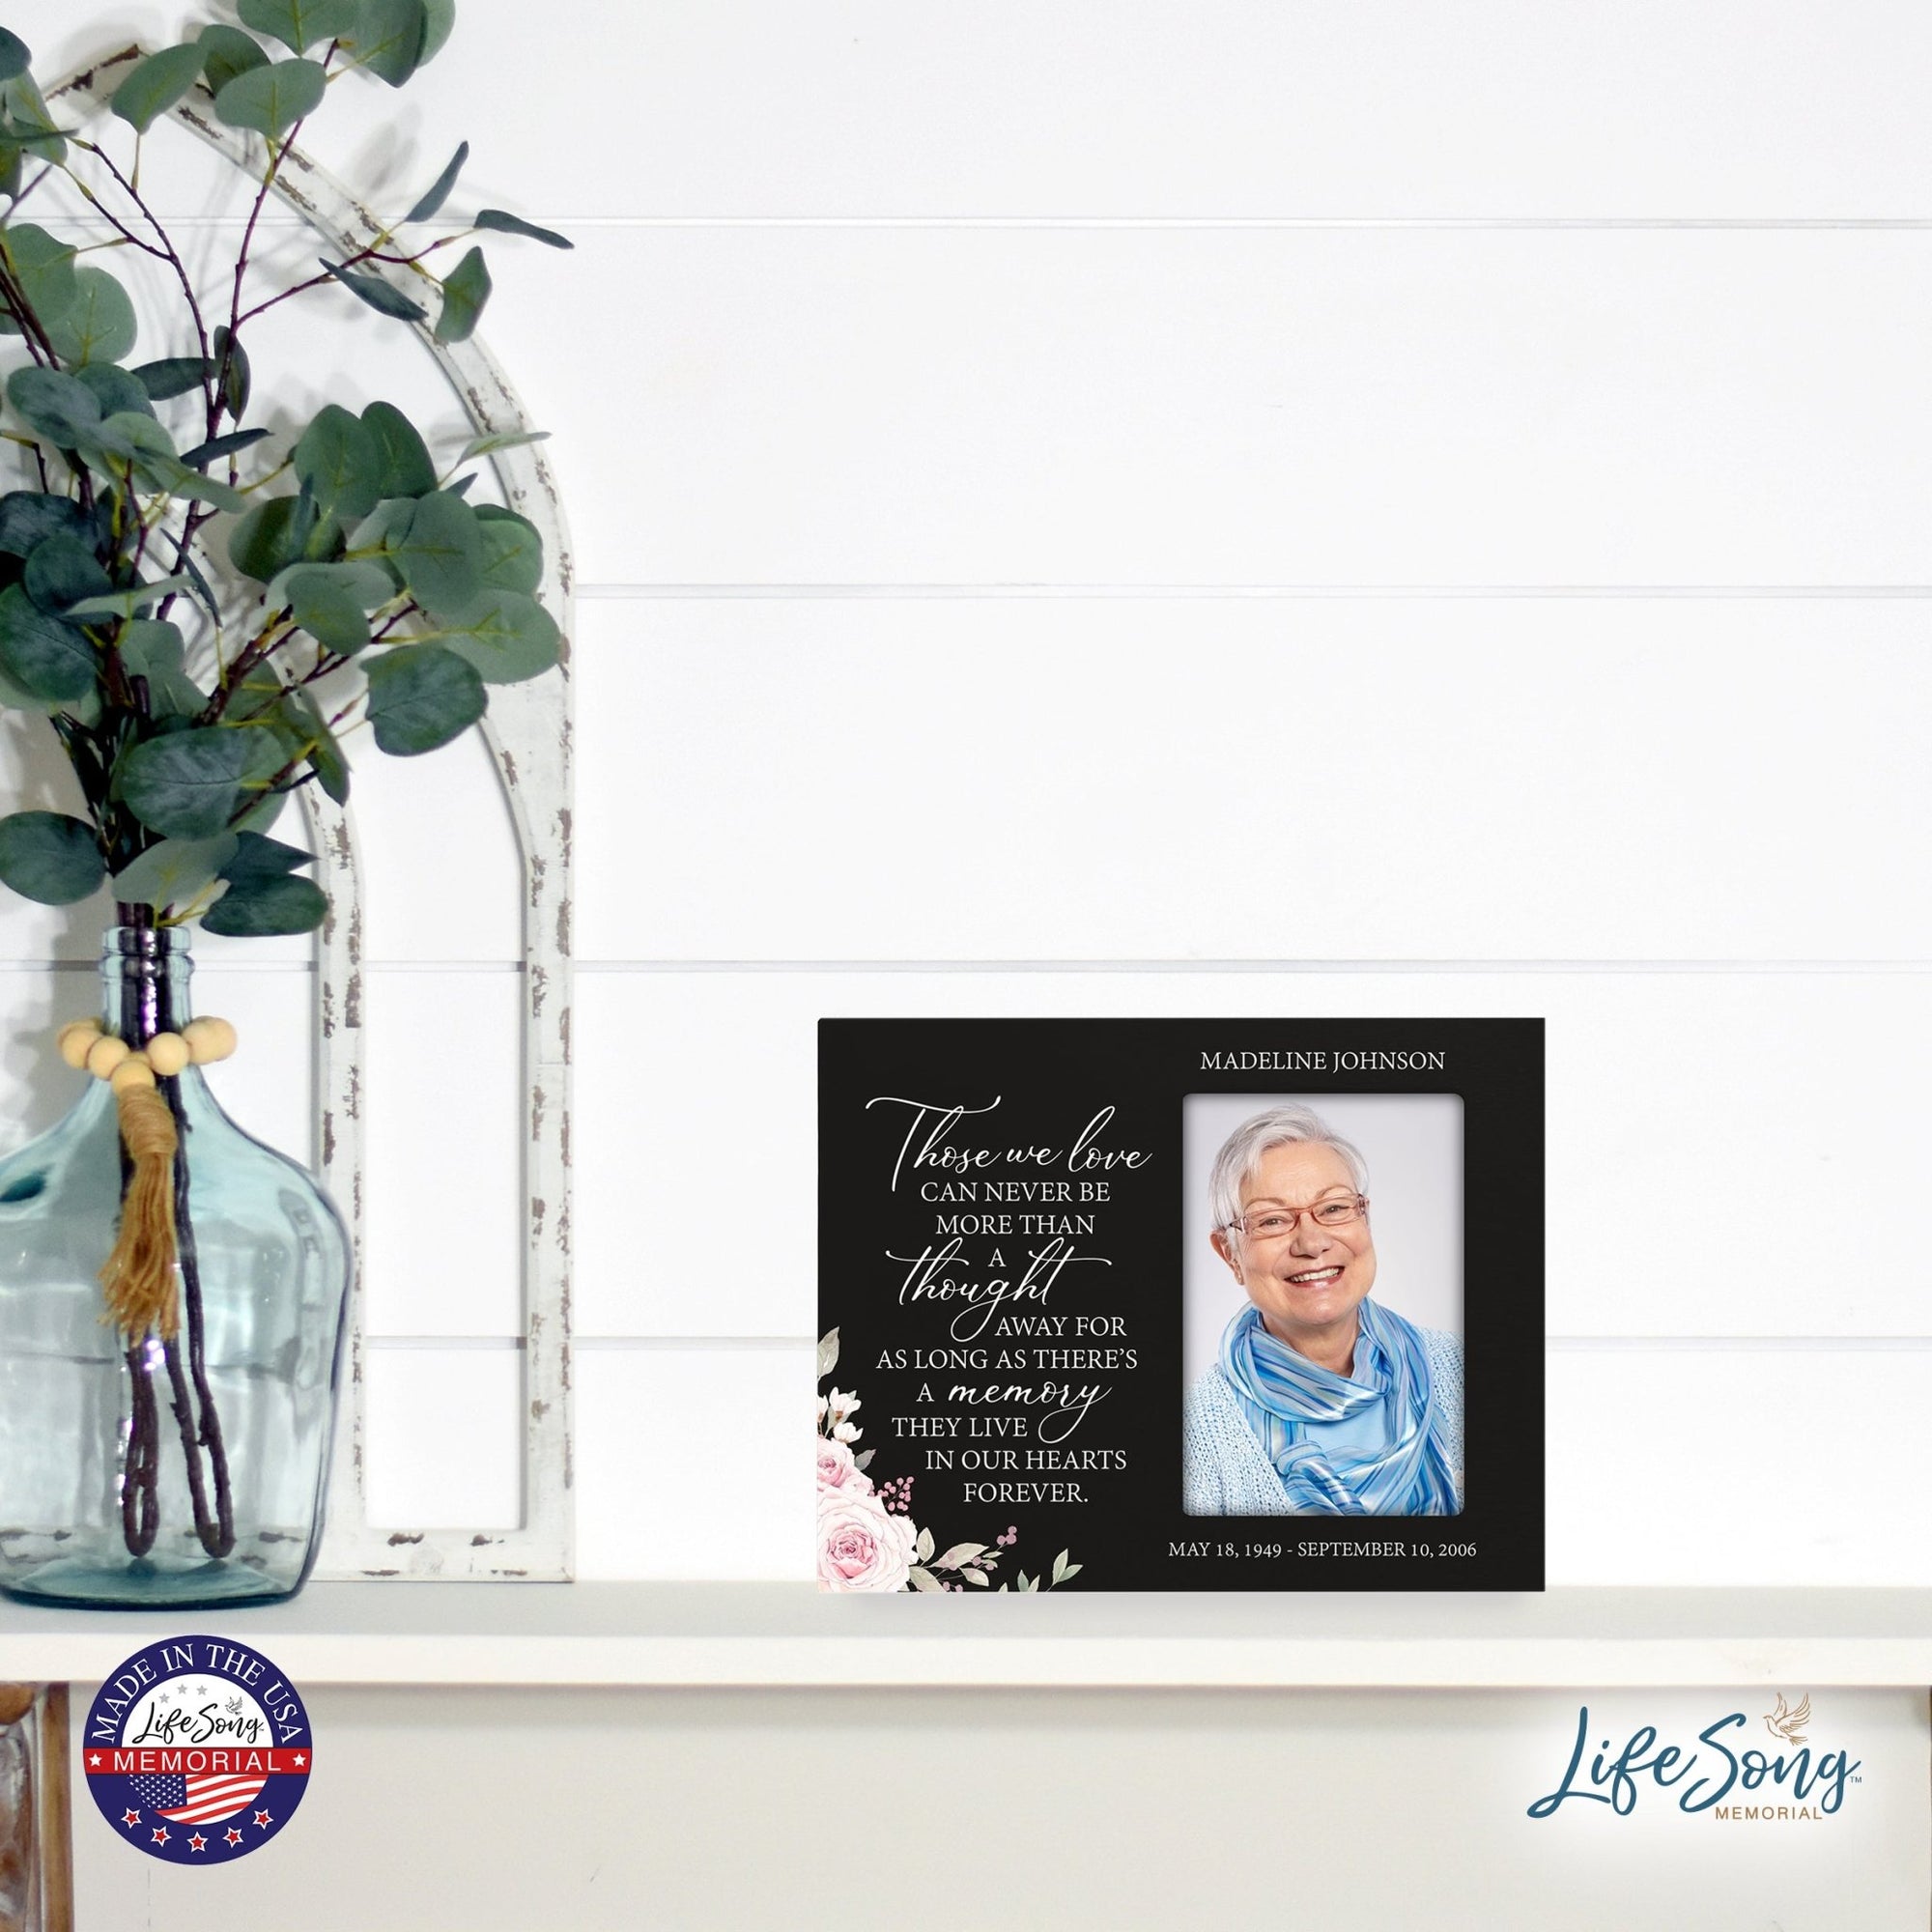 Personalized Horizontal 8x10 Wooden Memorial Picture Frame Holds 4x6 Photo - Those We Love Can Never (Black) - LifeSong Milestones